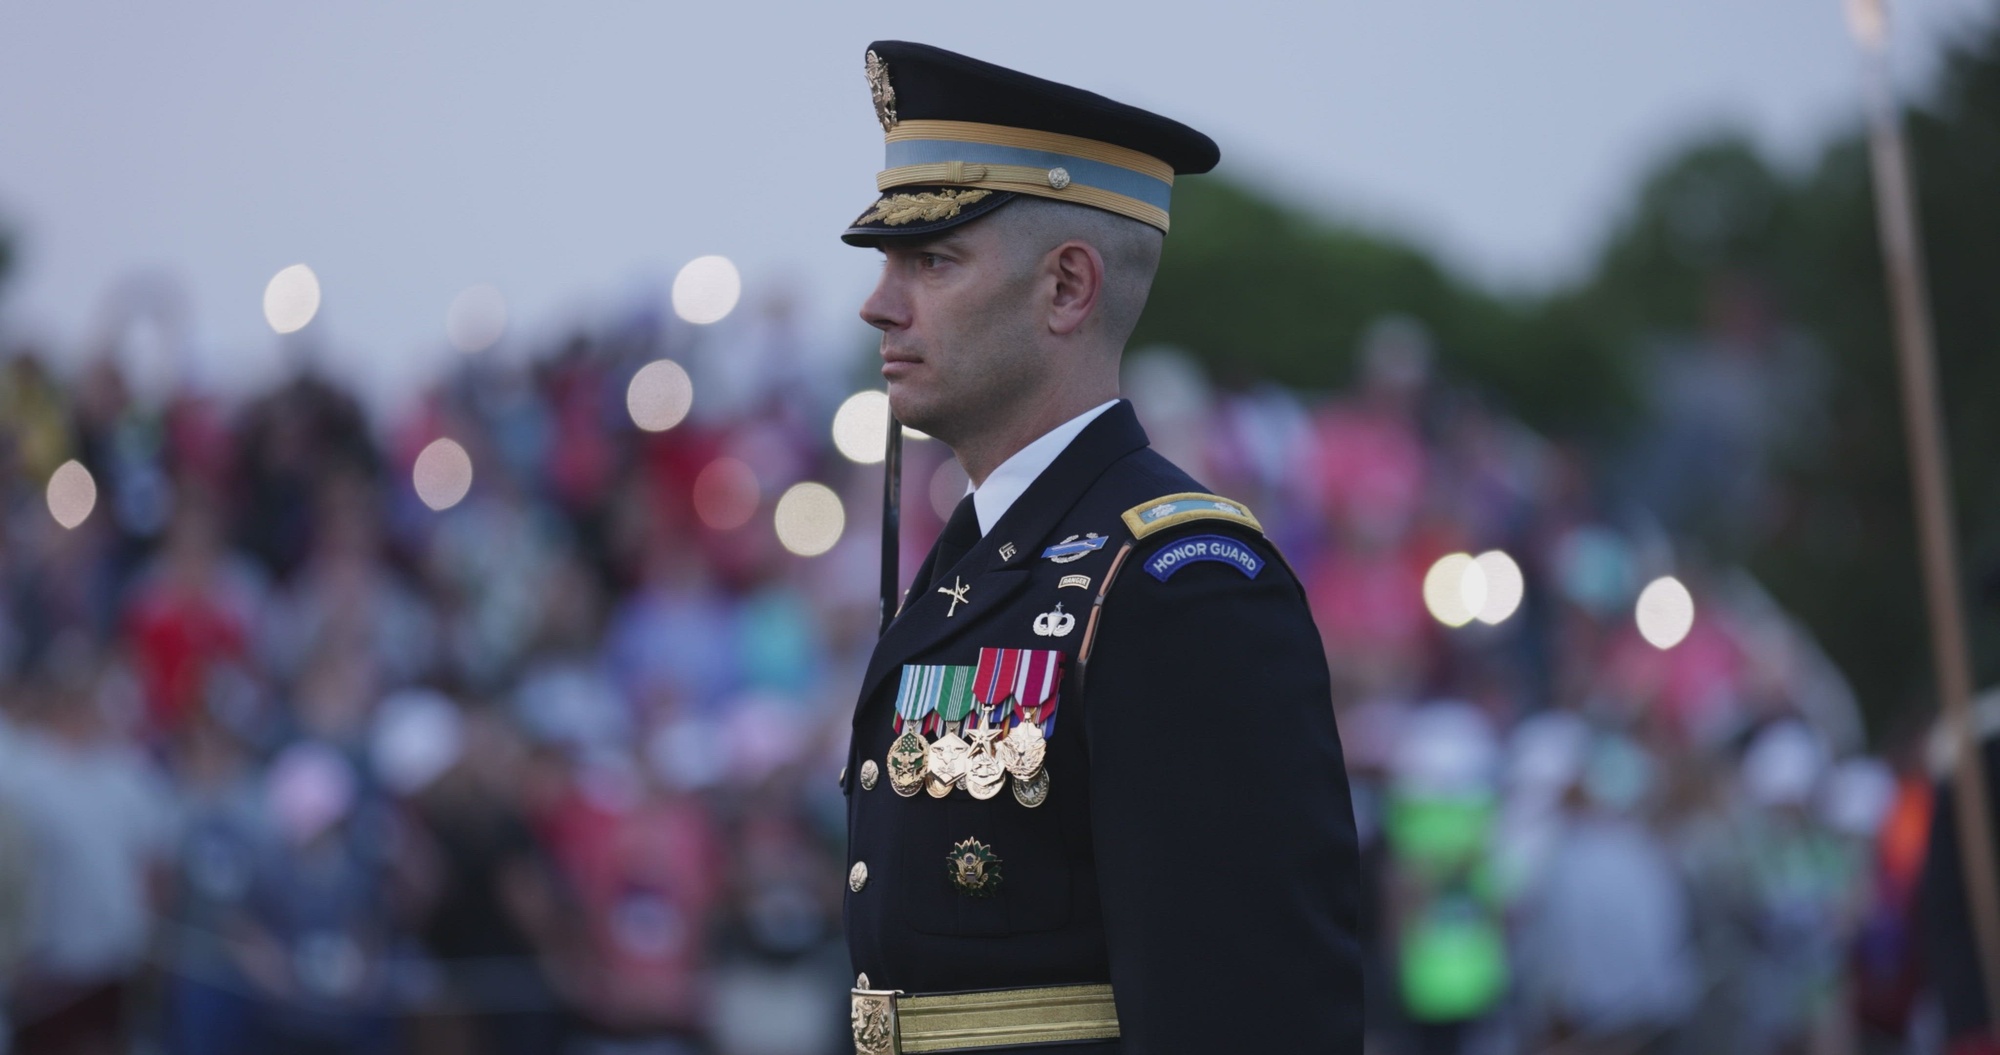 LTG Jody Daniels, the Chief of Army Reserve and Commanding General, U.S. Army Reserve Command, hosted the Twilight Tattoo on June 22, 2022, at Fort Myer.

The U.S. Army’s Twilight Tattoo is an action-packed military pageant featuring Soldiers from ceremonial units, the 3d U.S. Infantry Regiment (The Old Guard) and The U.S. Army Band "Pershing's Own." Twilight Tattoo is appropriate for school-age children and enjoyed by all ages! Learn more about upcoming shows at https://twilight.mdw.army.mil/